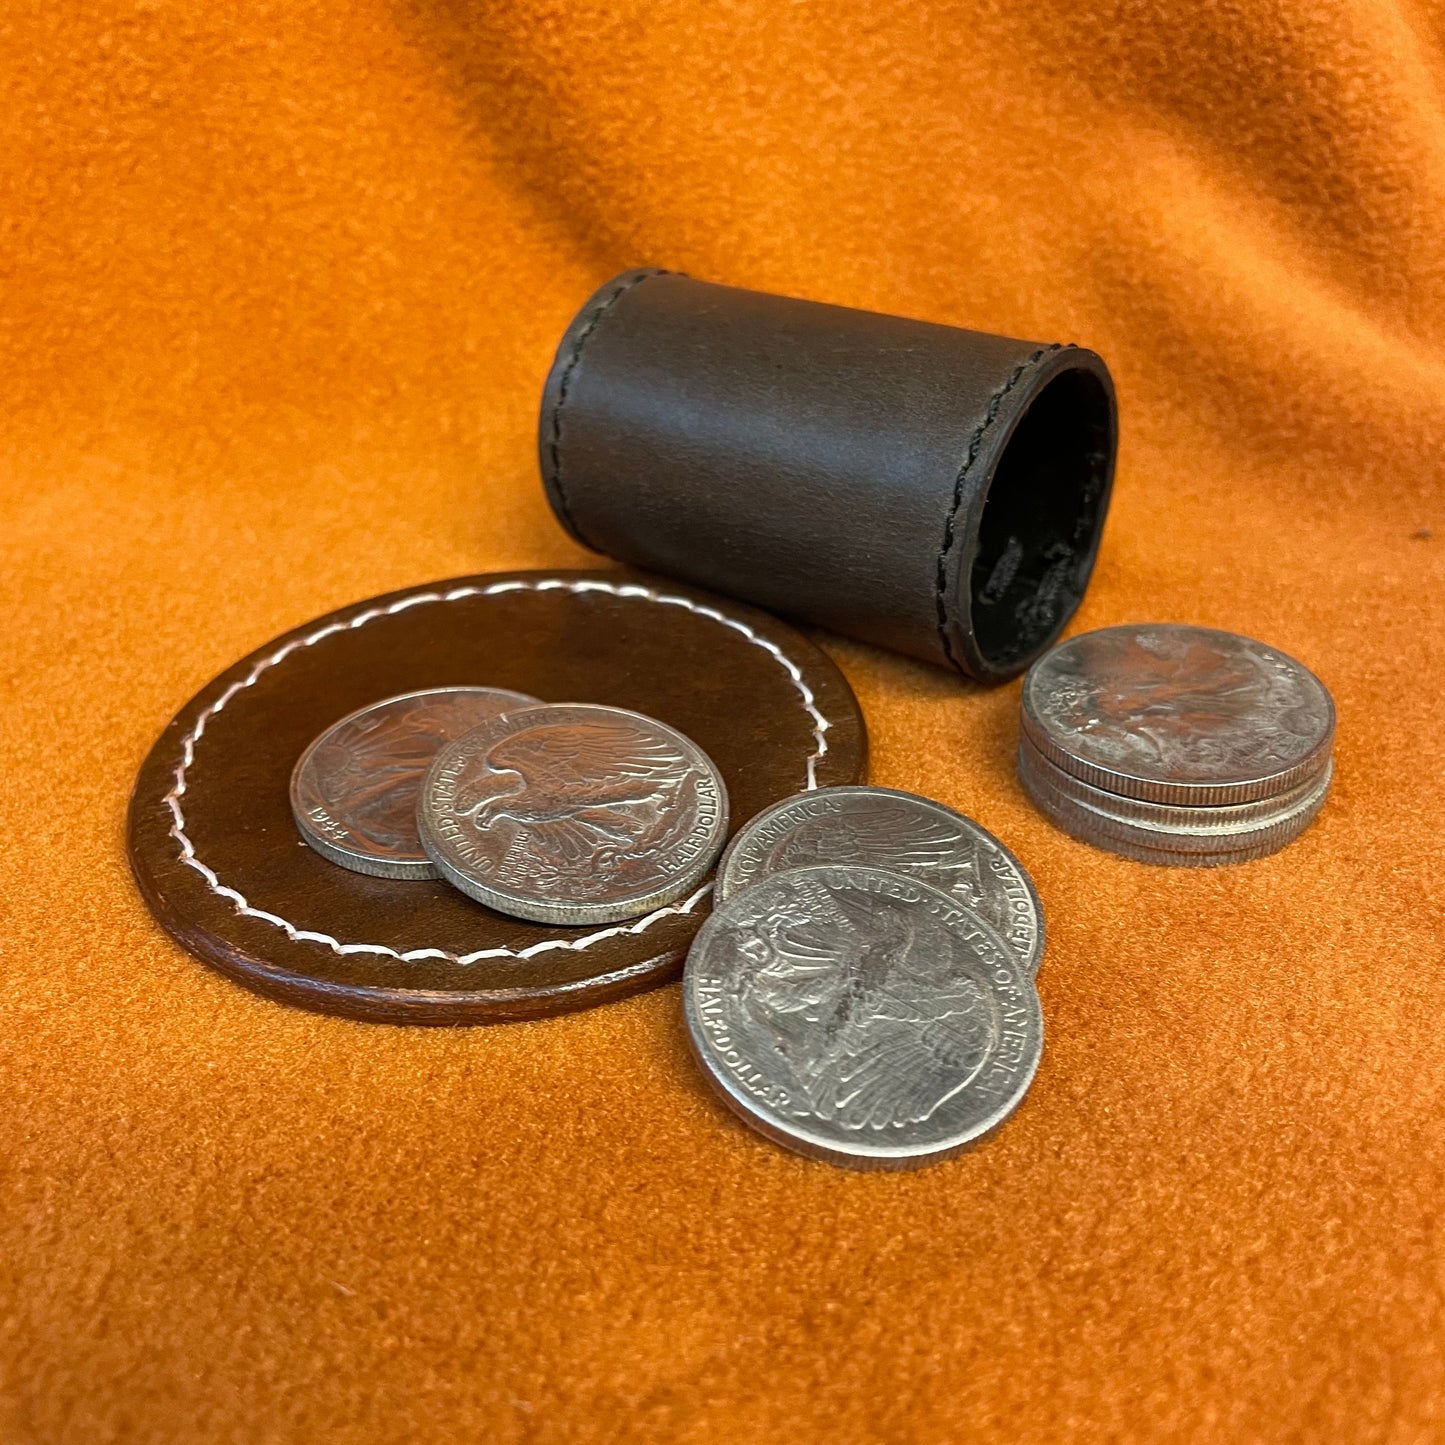 Cylinder and Coins ala John Ramsey